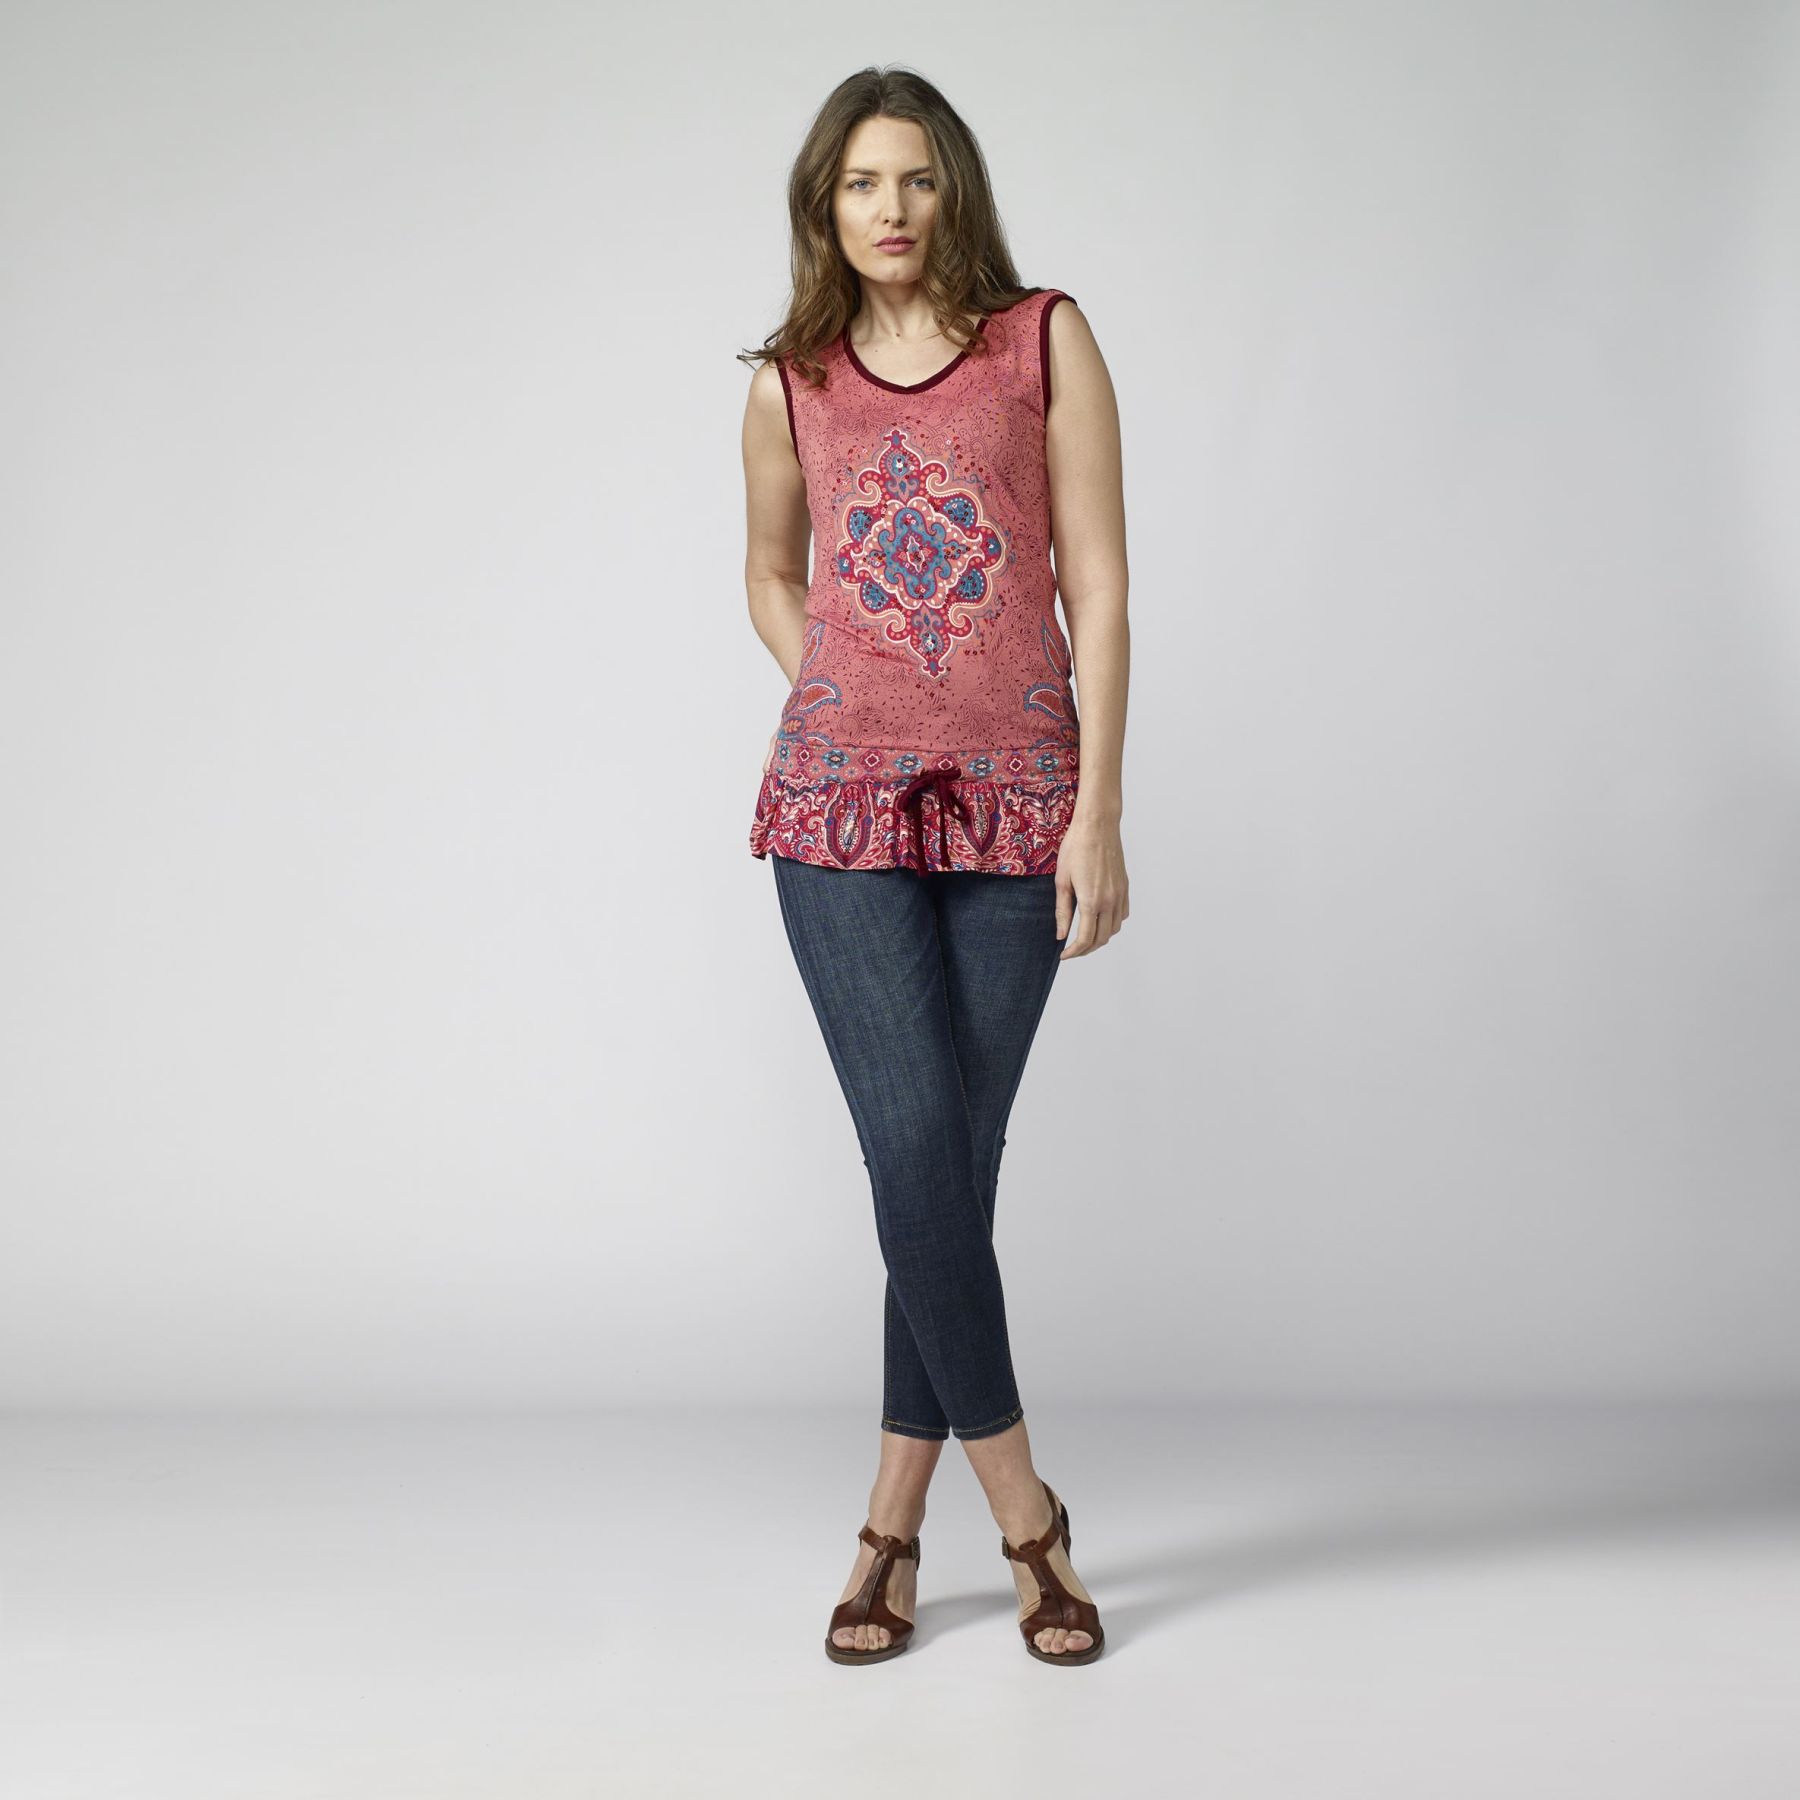 Coral Color Ethnic Print Tank Top for Women